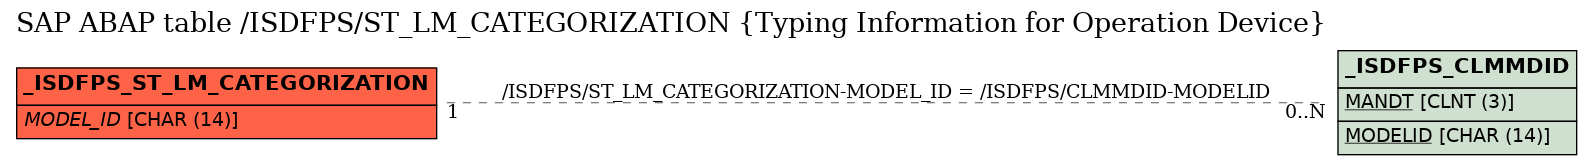 E-R Diagram for table /ISDFPS/ST_LM_CATEGORIZATION (Typing Information for Operation Device)